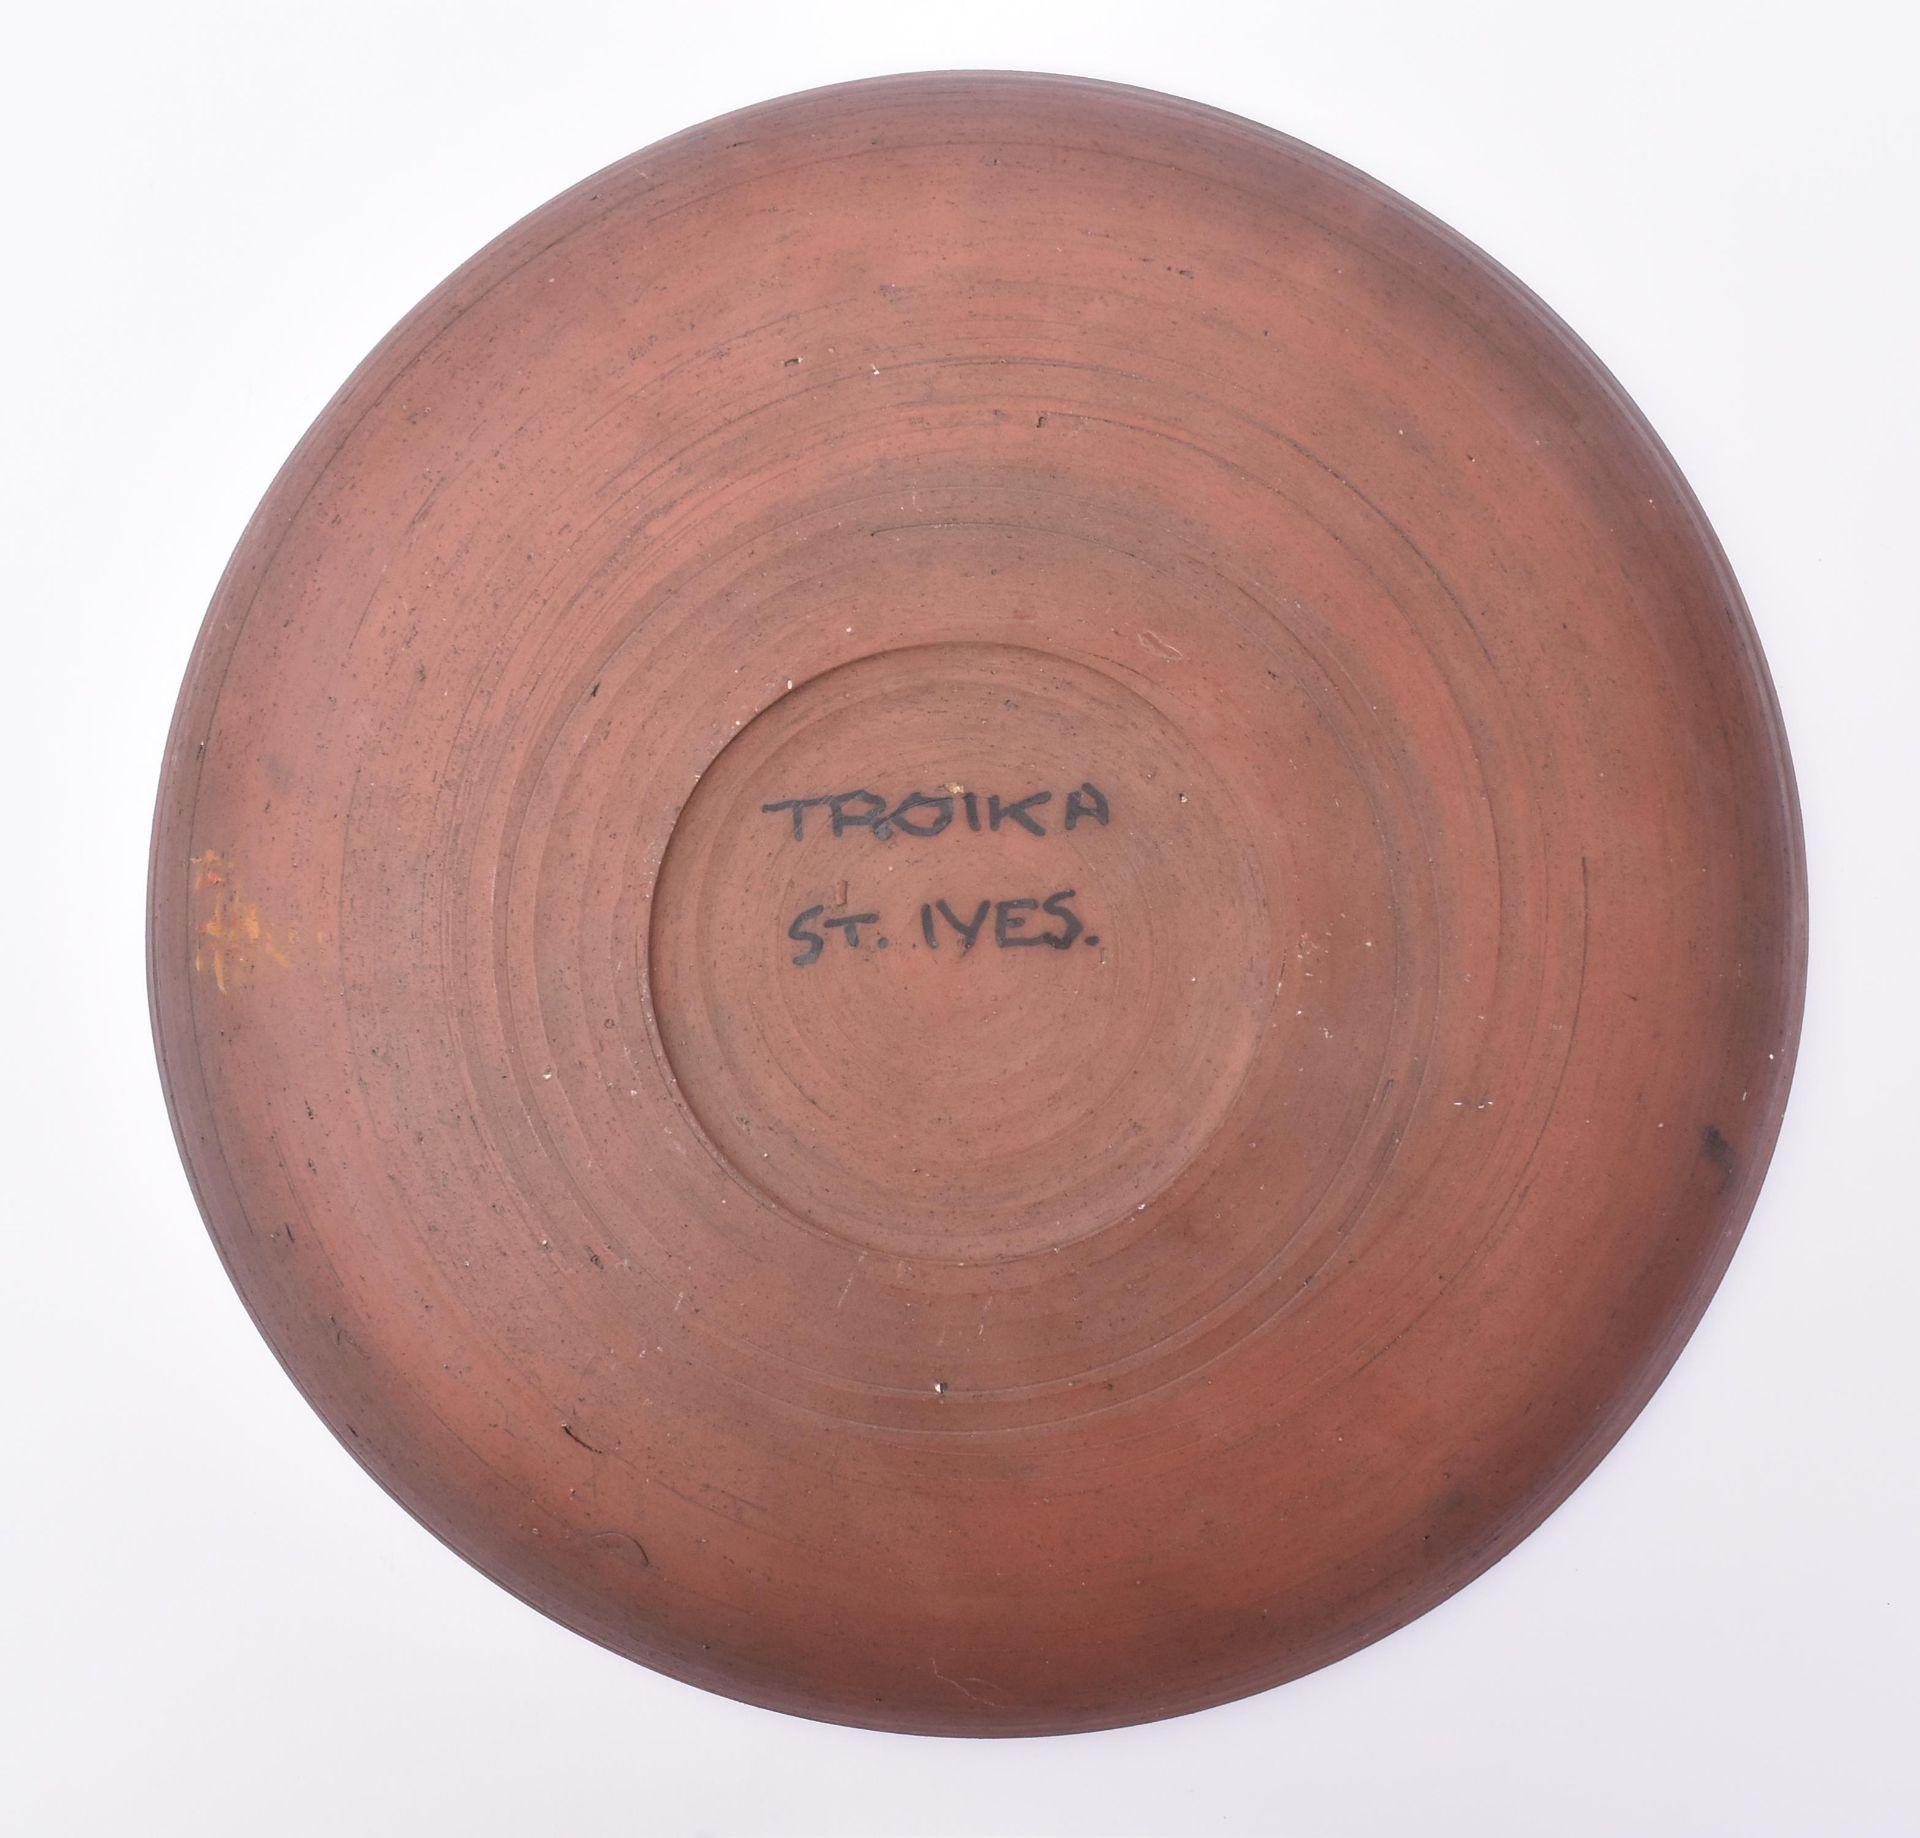 TROIKA CORNWALL - MID 20TH CENTURY POTTERY BOWL - Image 3 of 4